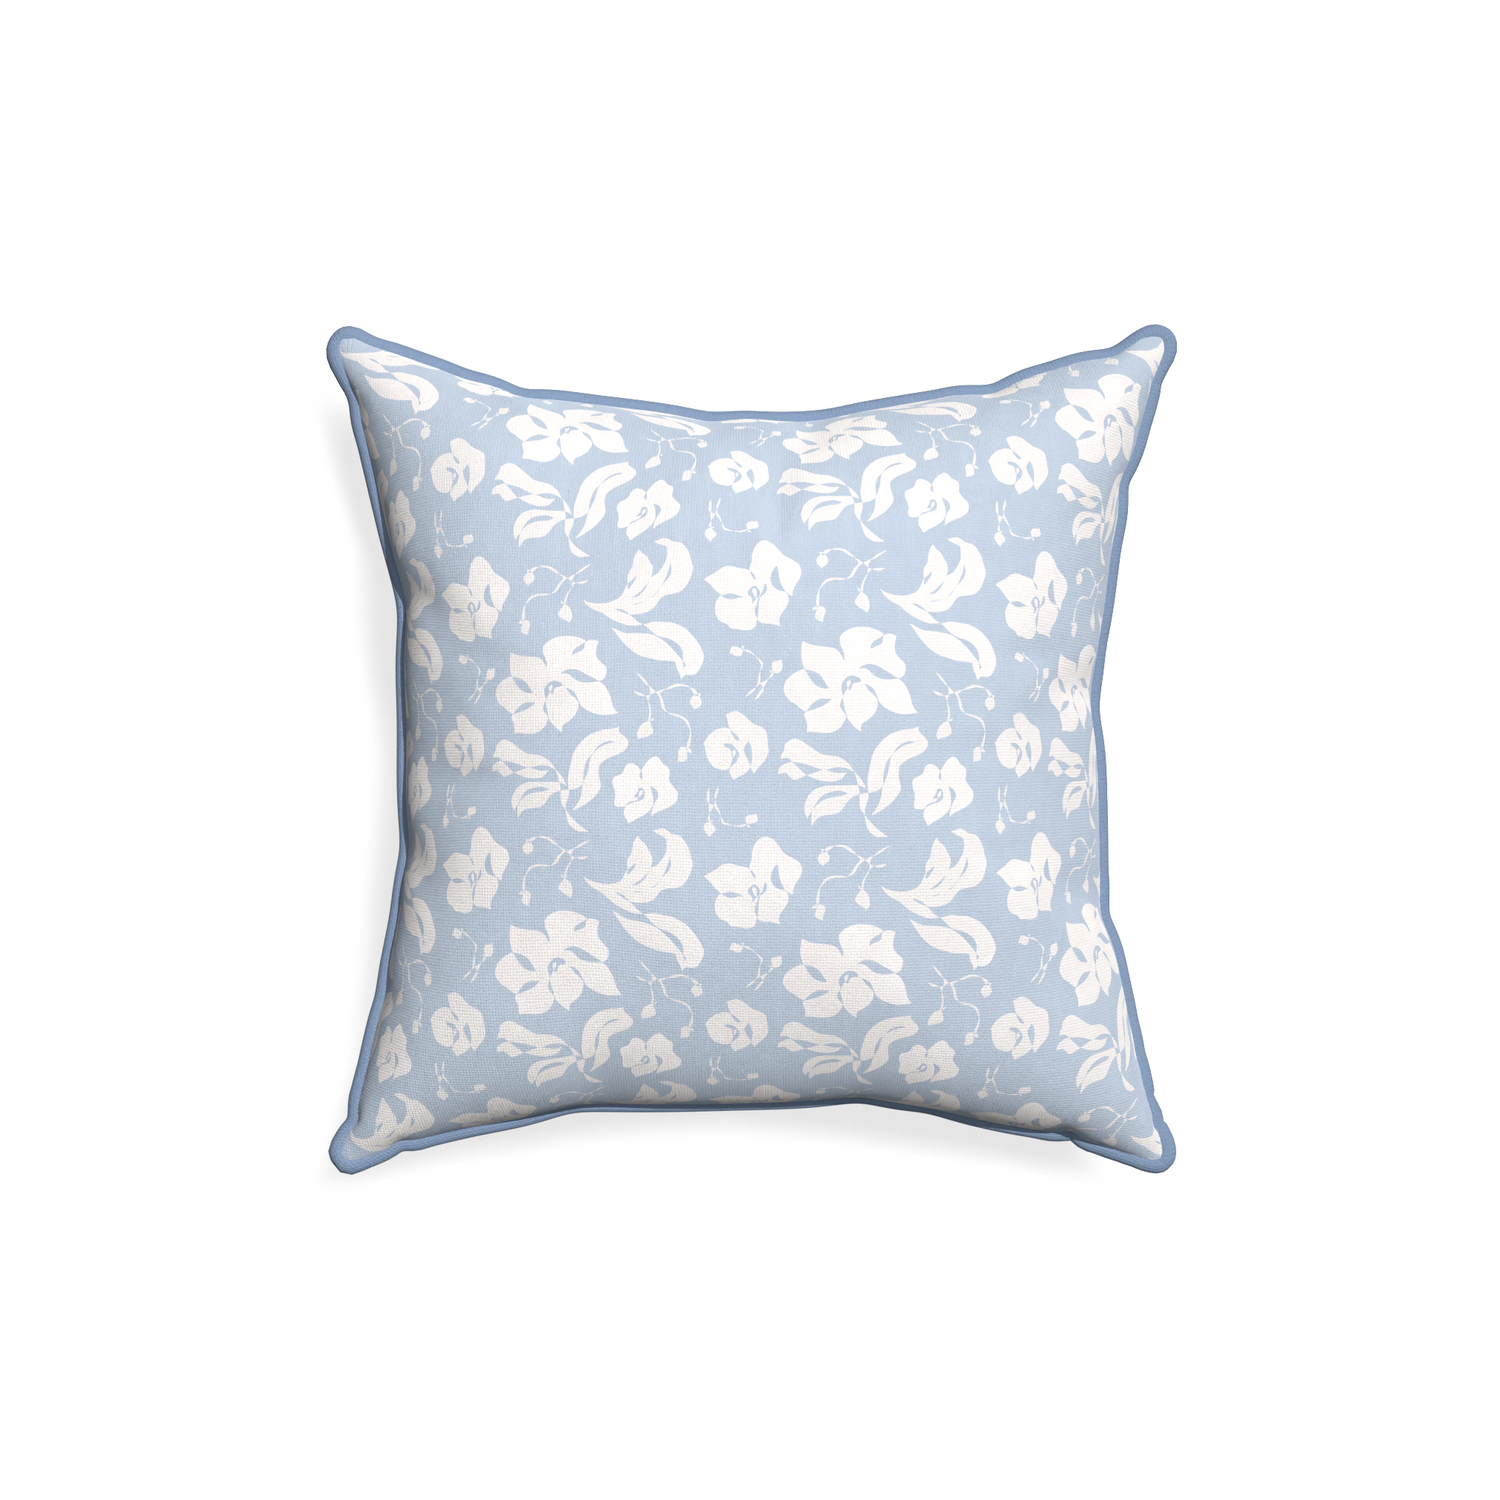 18-square georgia custom cornflower blue floralpillow with sky piping on white background